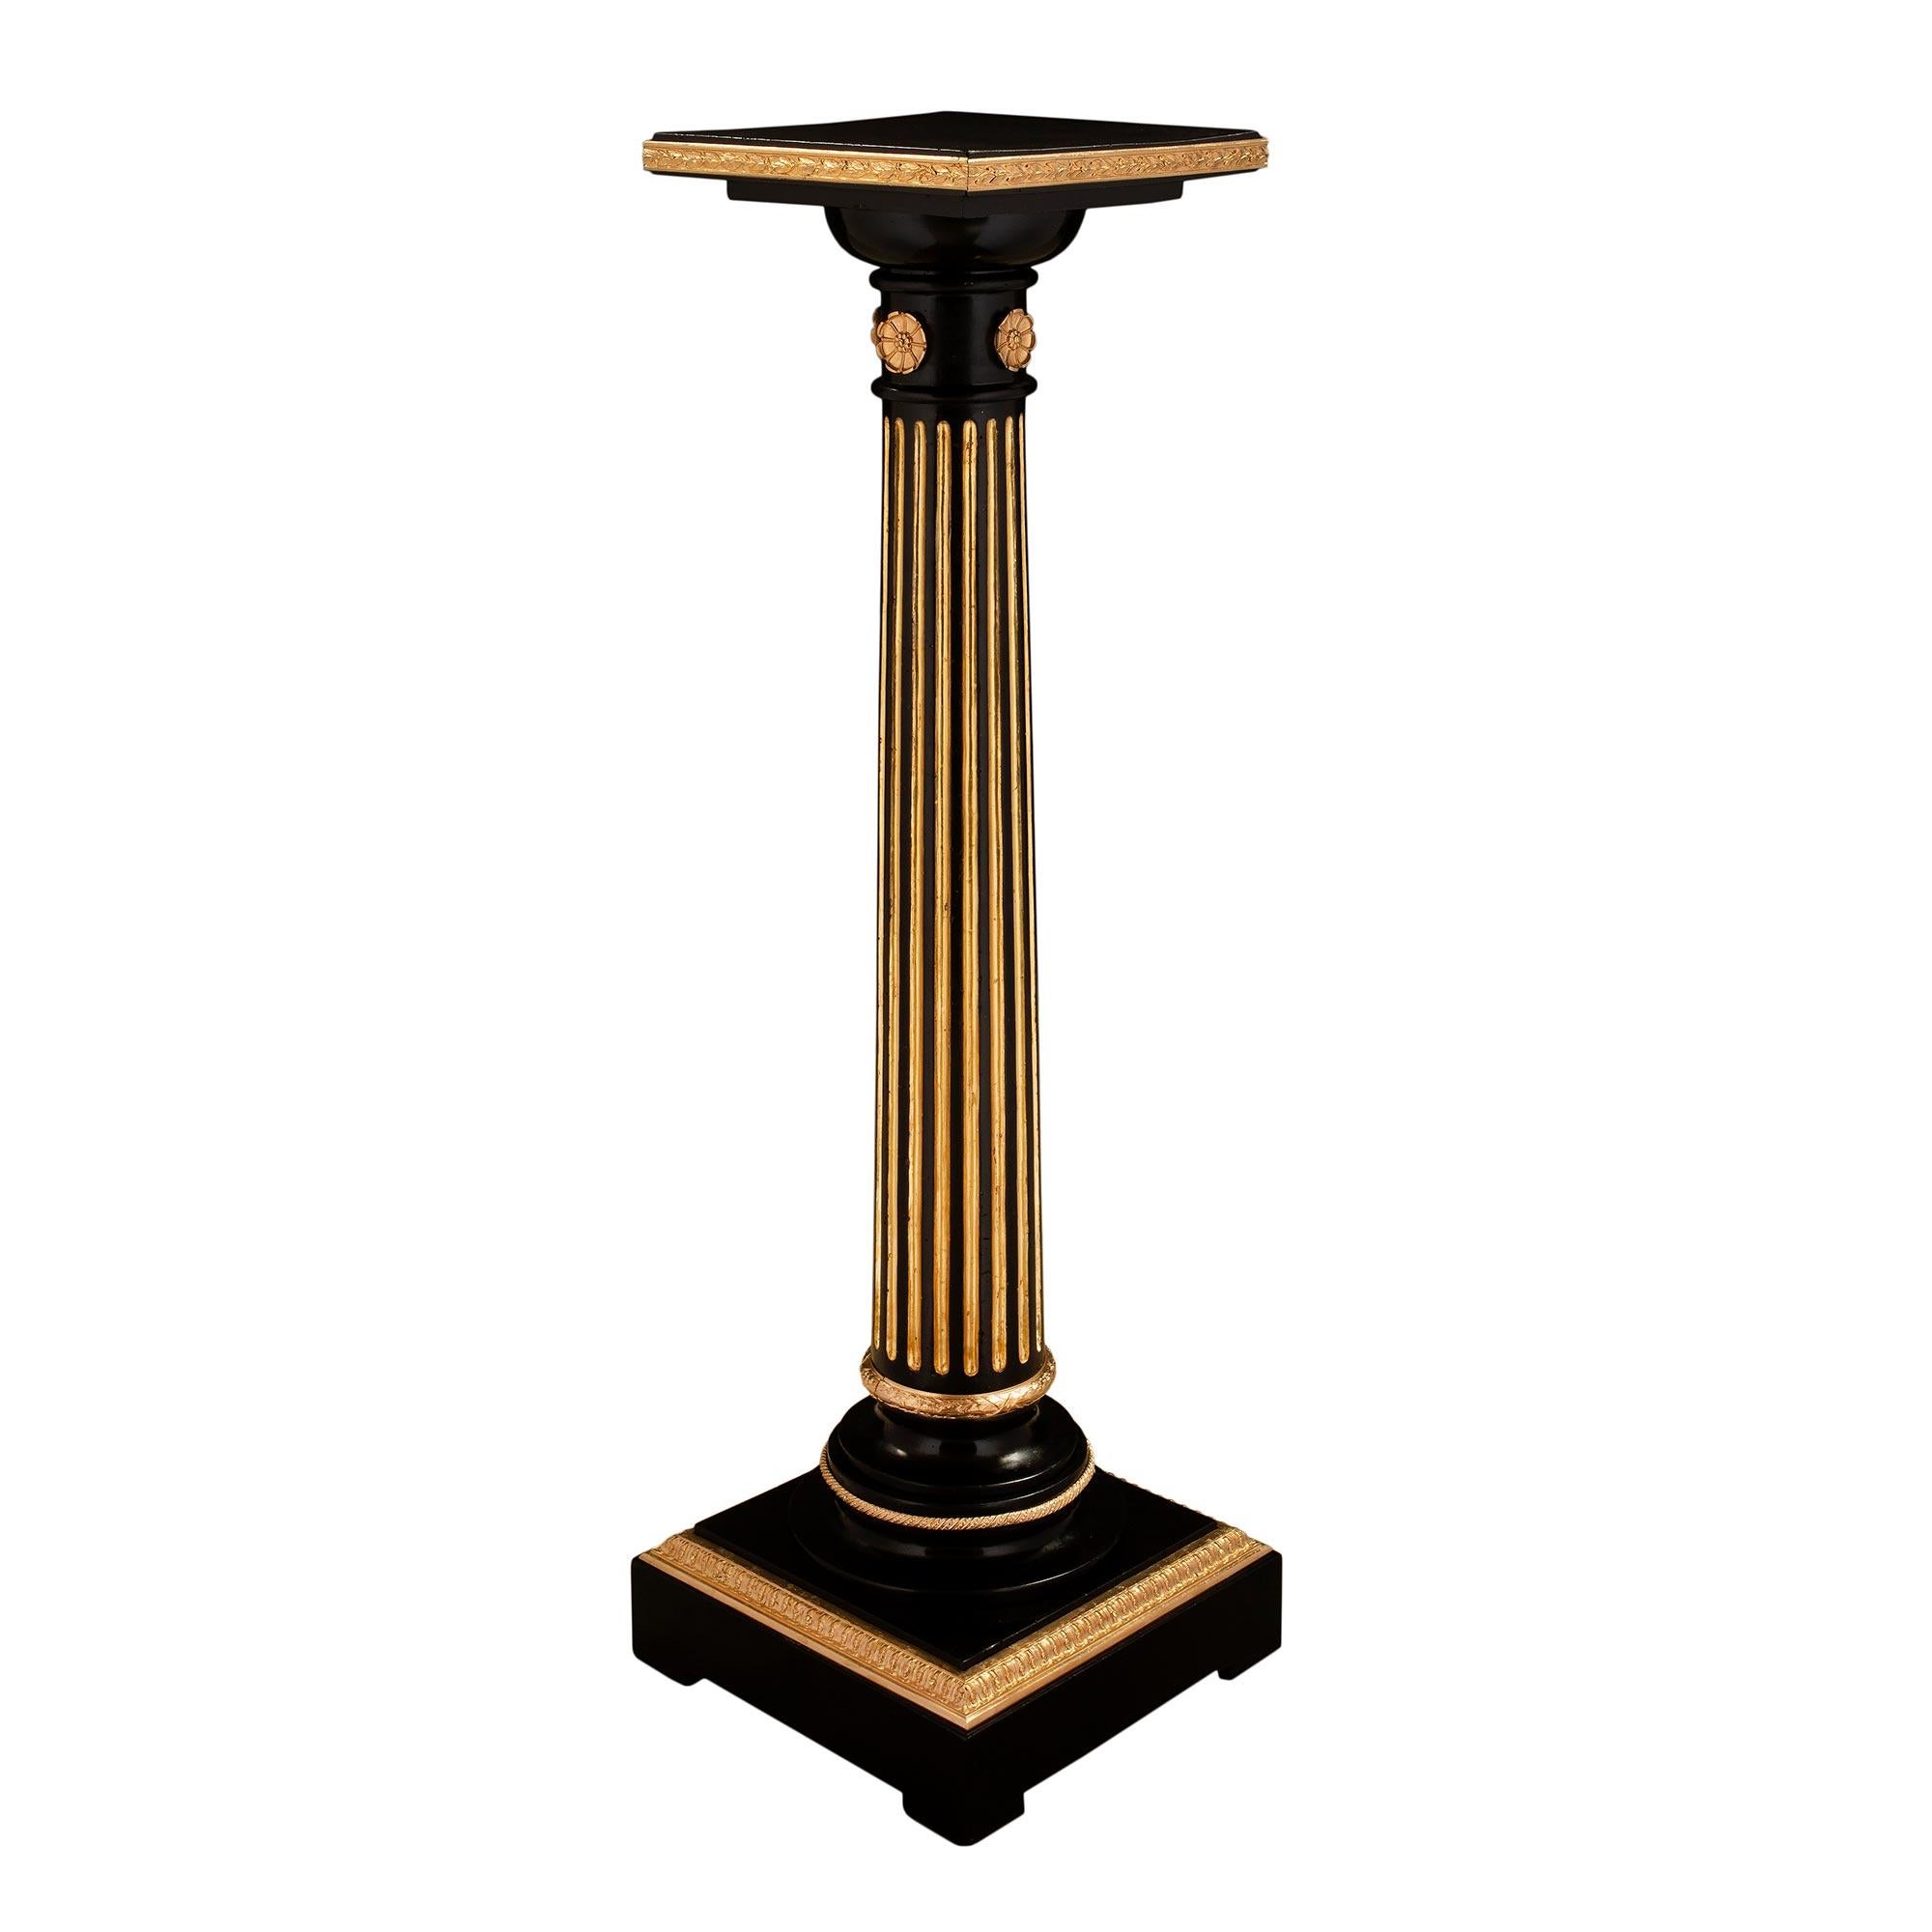 A handsome French mid-19th century Louis XVI st. ebony, giltwood and ormolu mounted pedestal. The pedestal is raised by a square ebony base with a richly chased Coeur de Rai designed ormolu band. Above is a circular socle with two ormolu bands. The